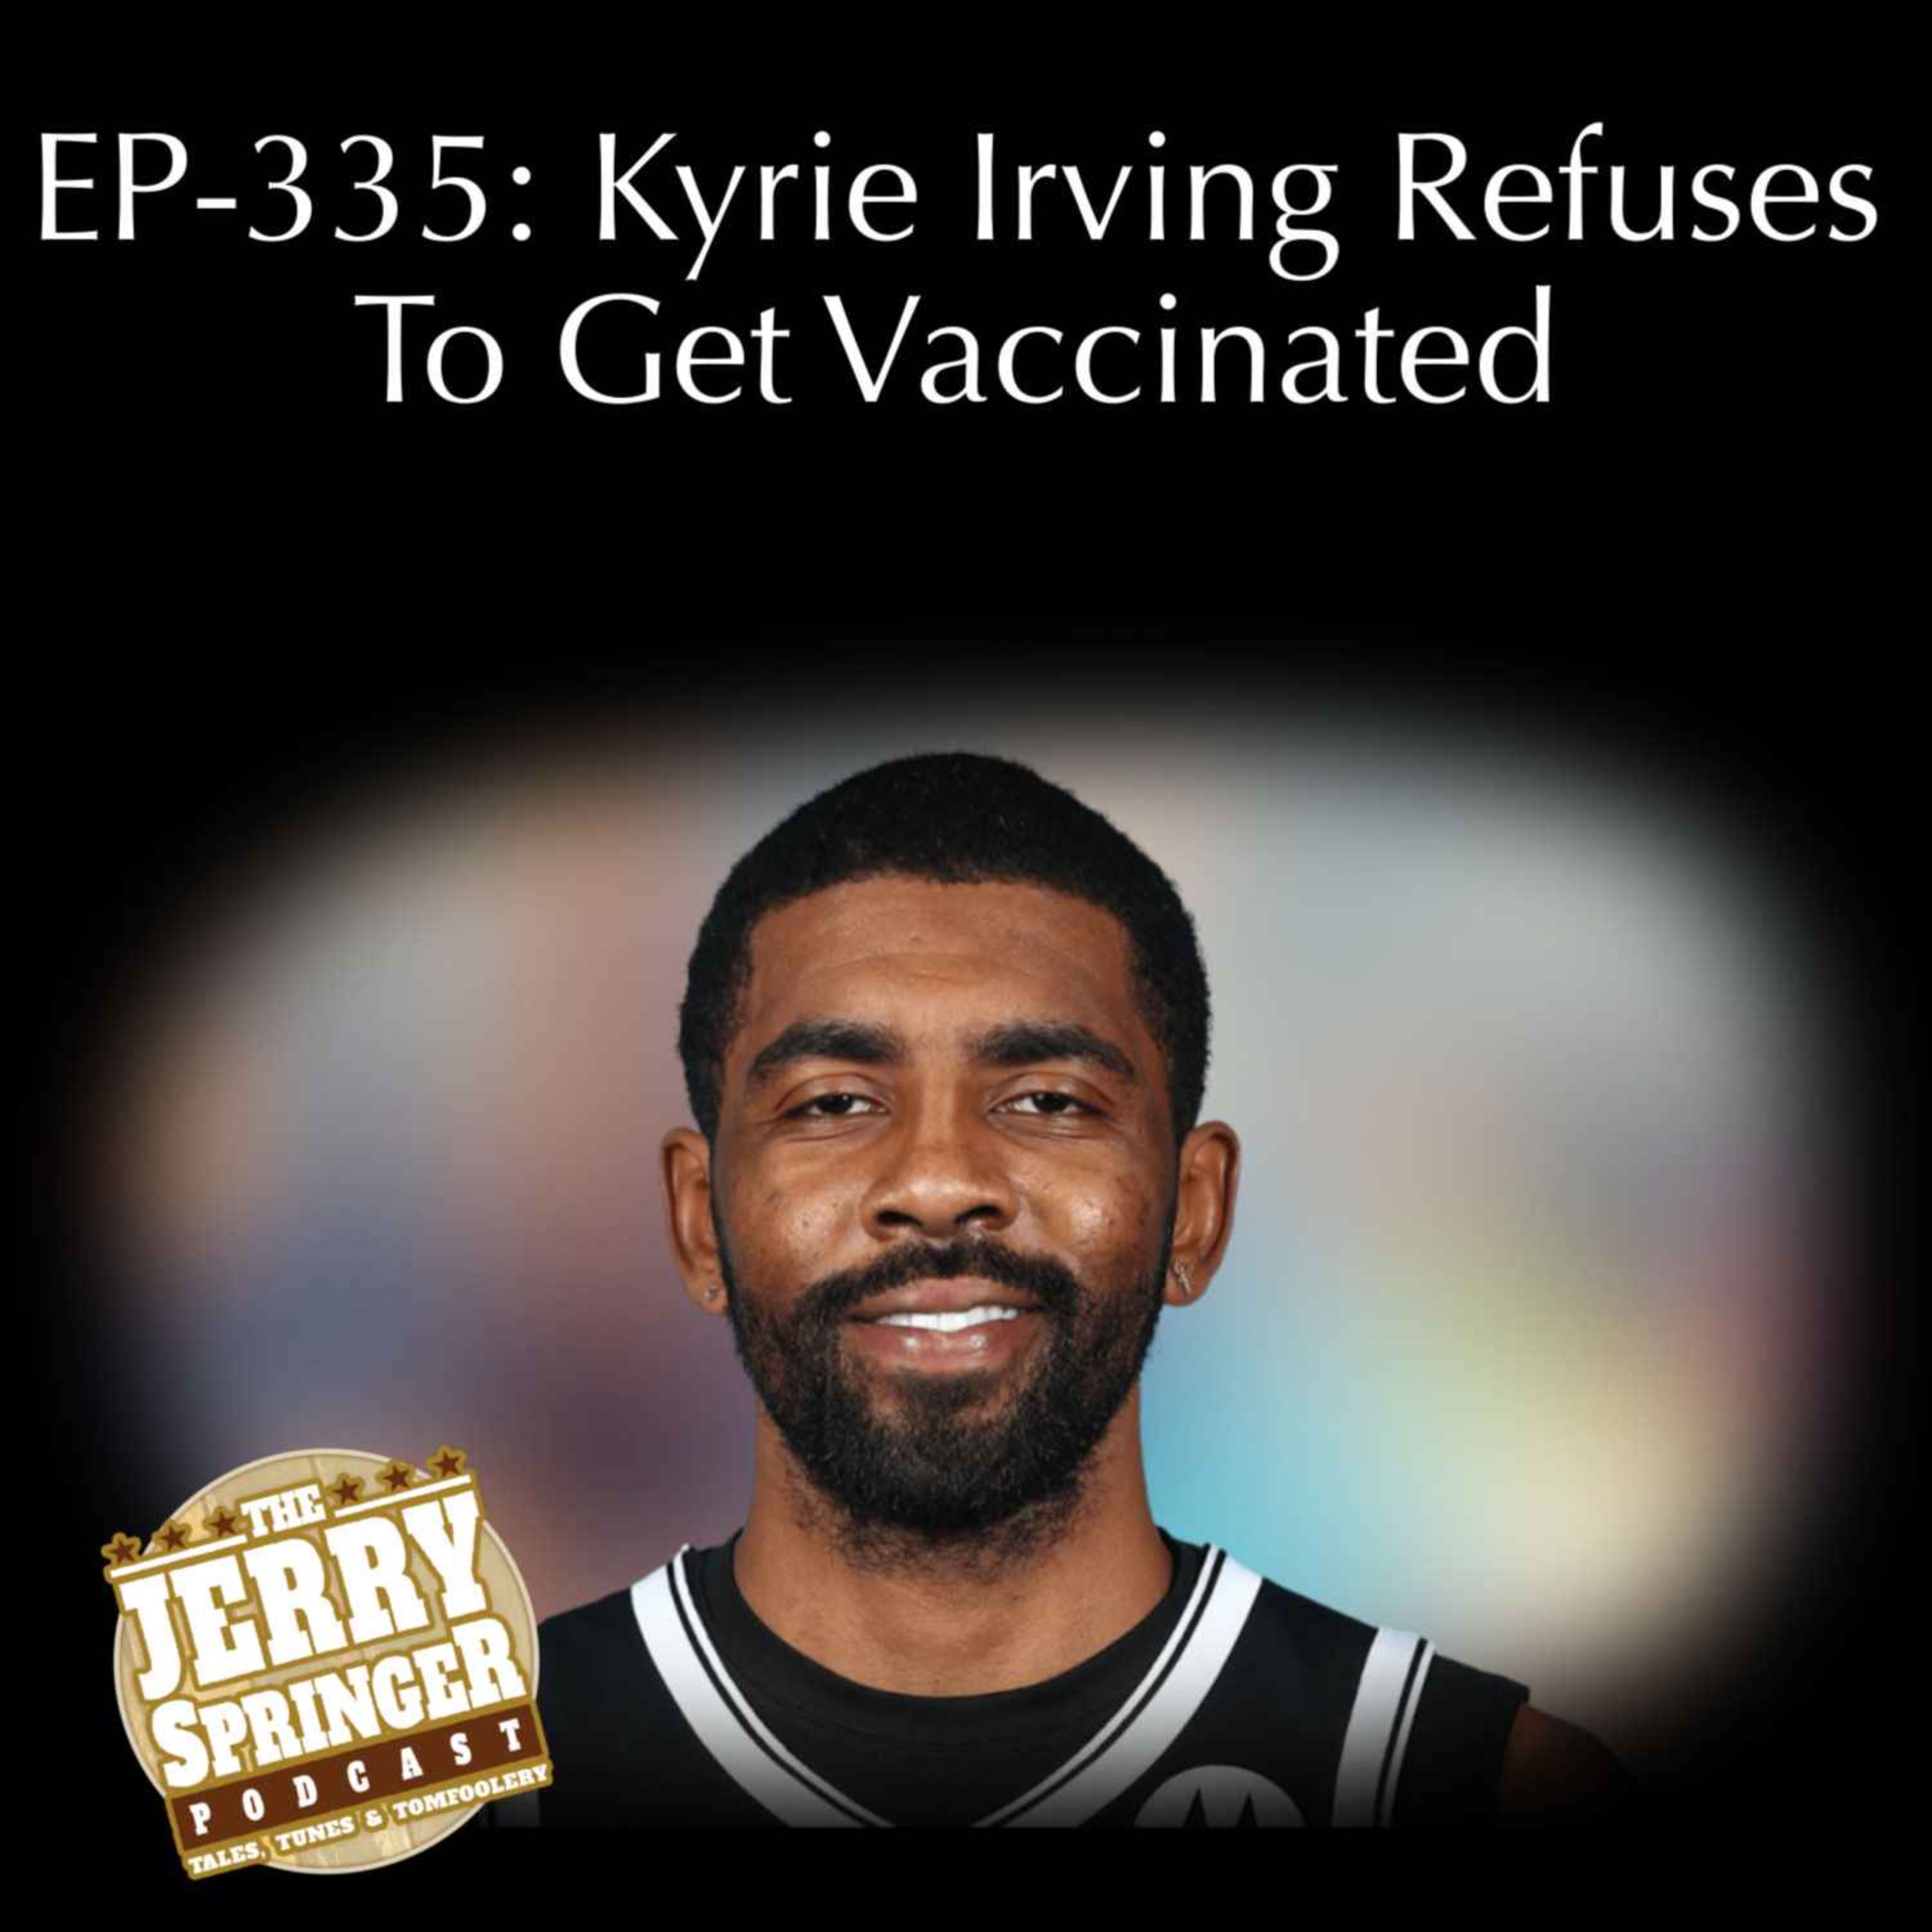 Kyrie Irving Refuses To Get Vaccinated: EP - 335